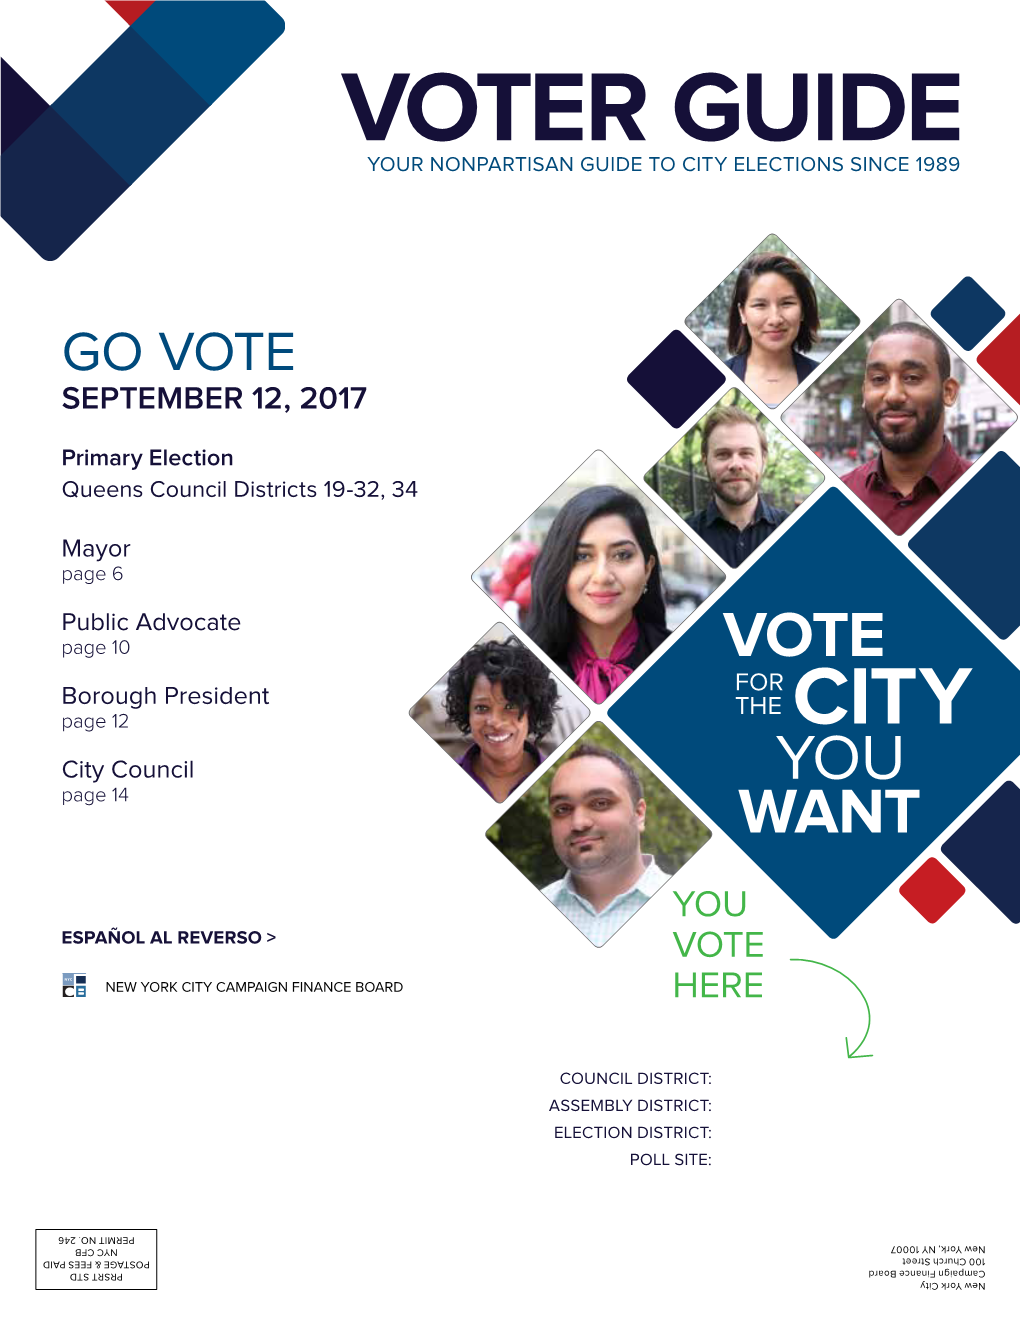 Voter Guide Your Nonpartisan Guide to City Elections Since 1989